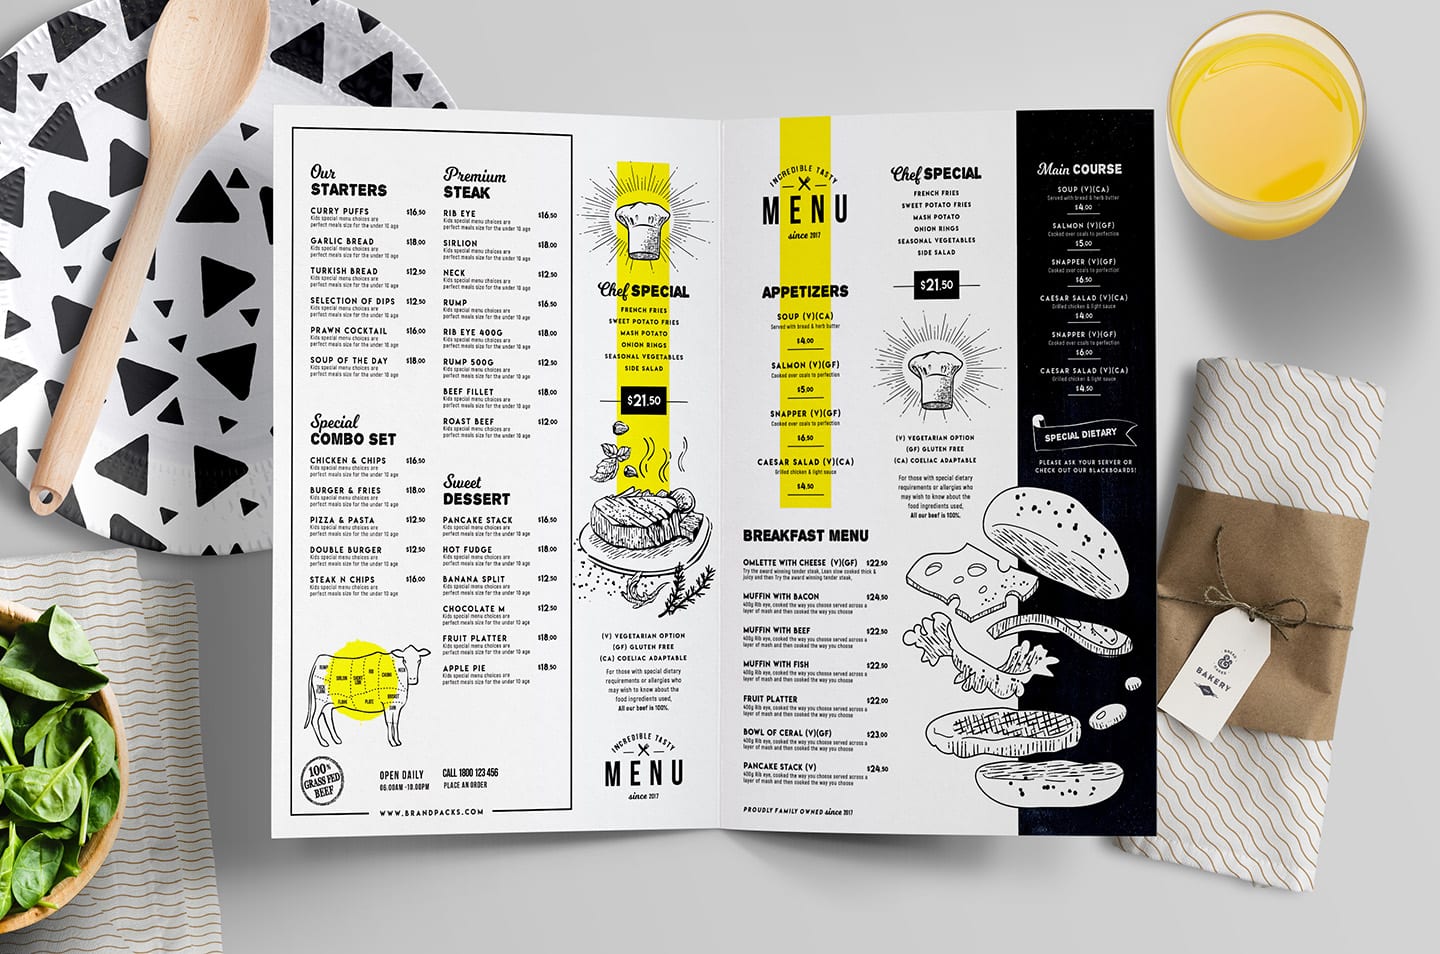 Download A4 Food Menu Templates for Restaurants in PSD, Ai & Vector - BrandPacks